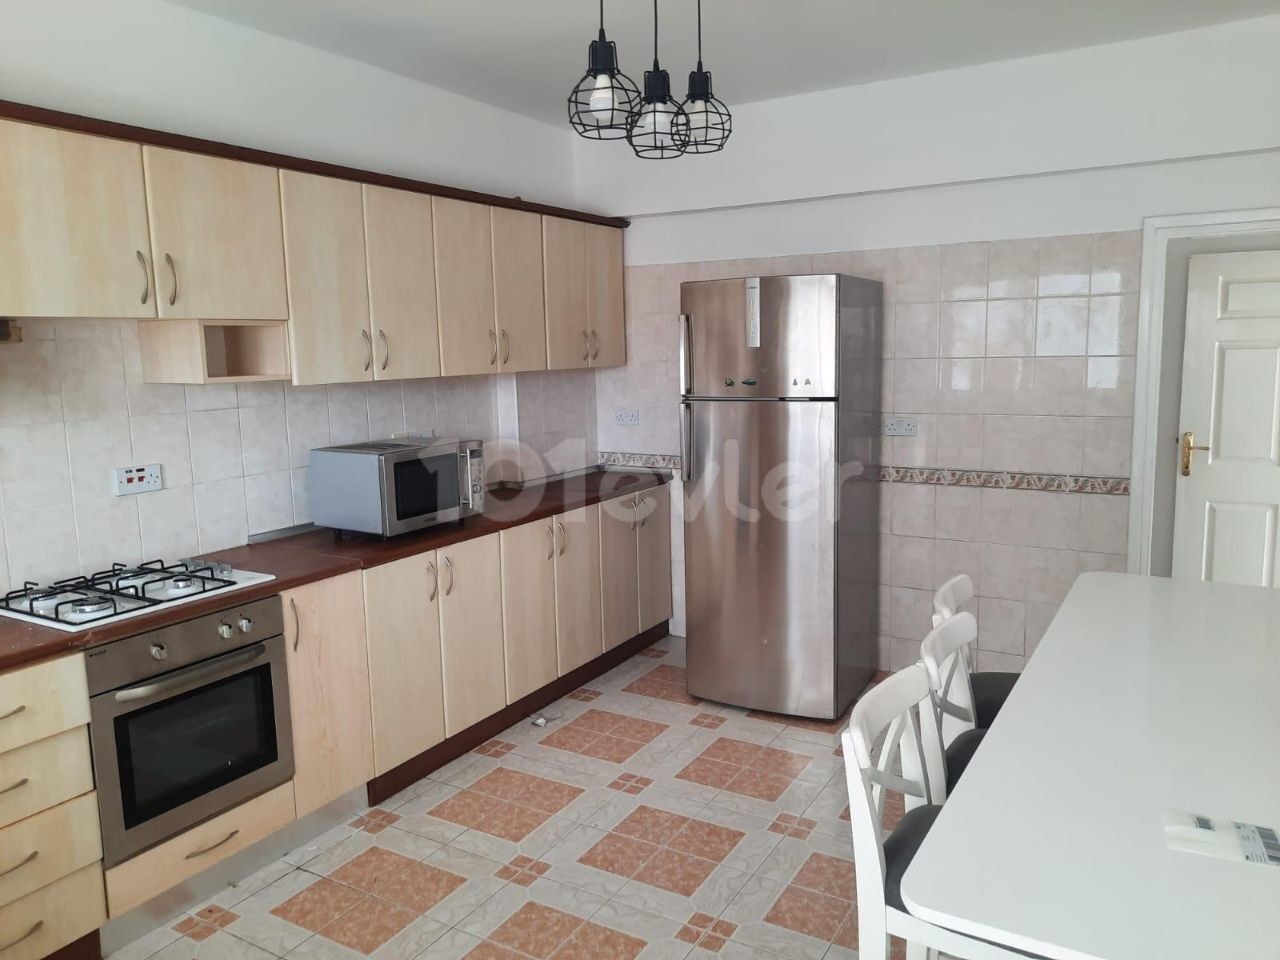 FLAT FOR RENT IN A CENTRAL LOCATION IN MARMARA REGION